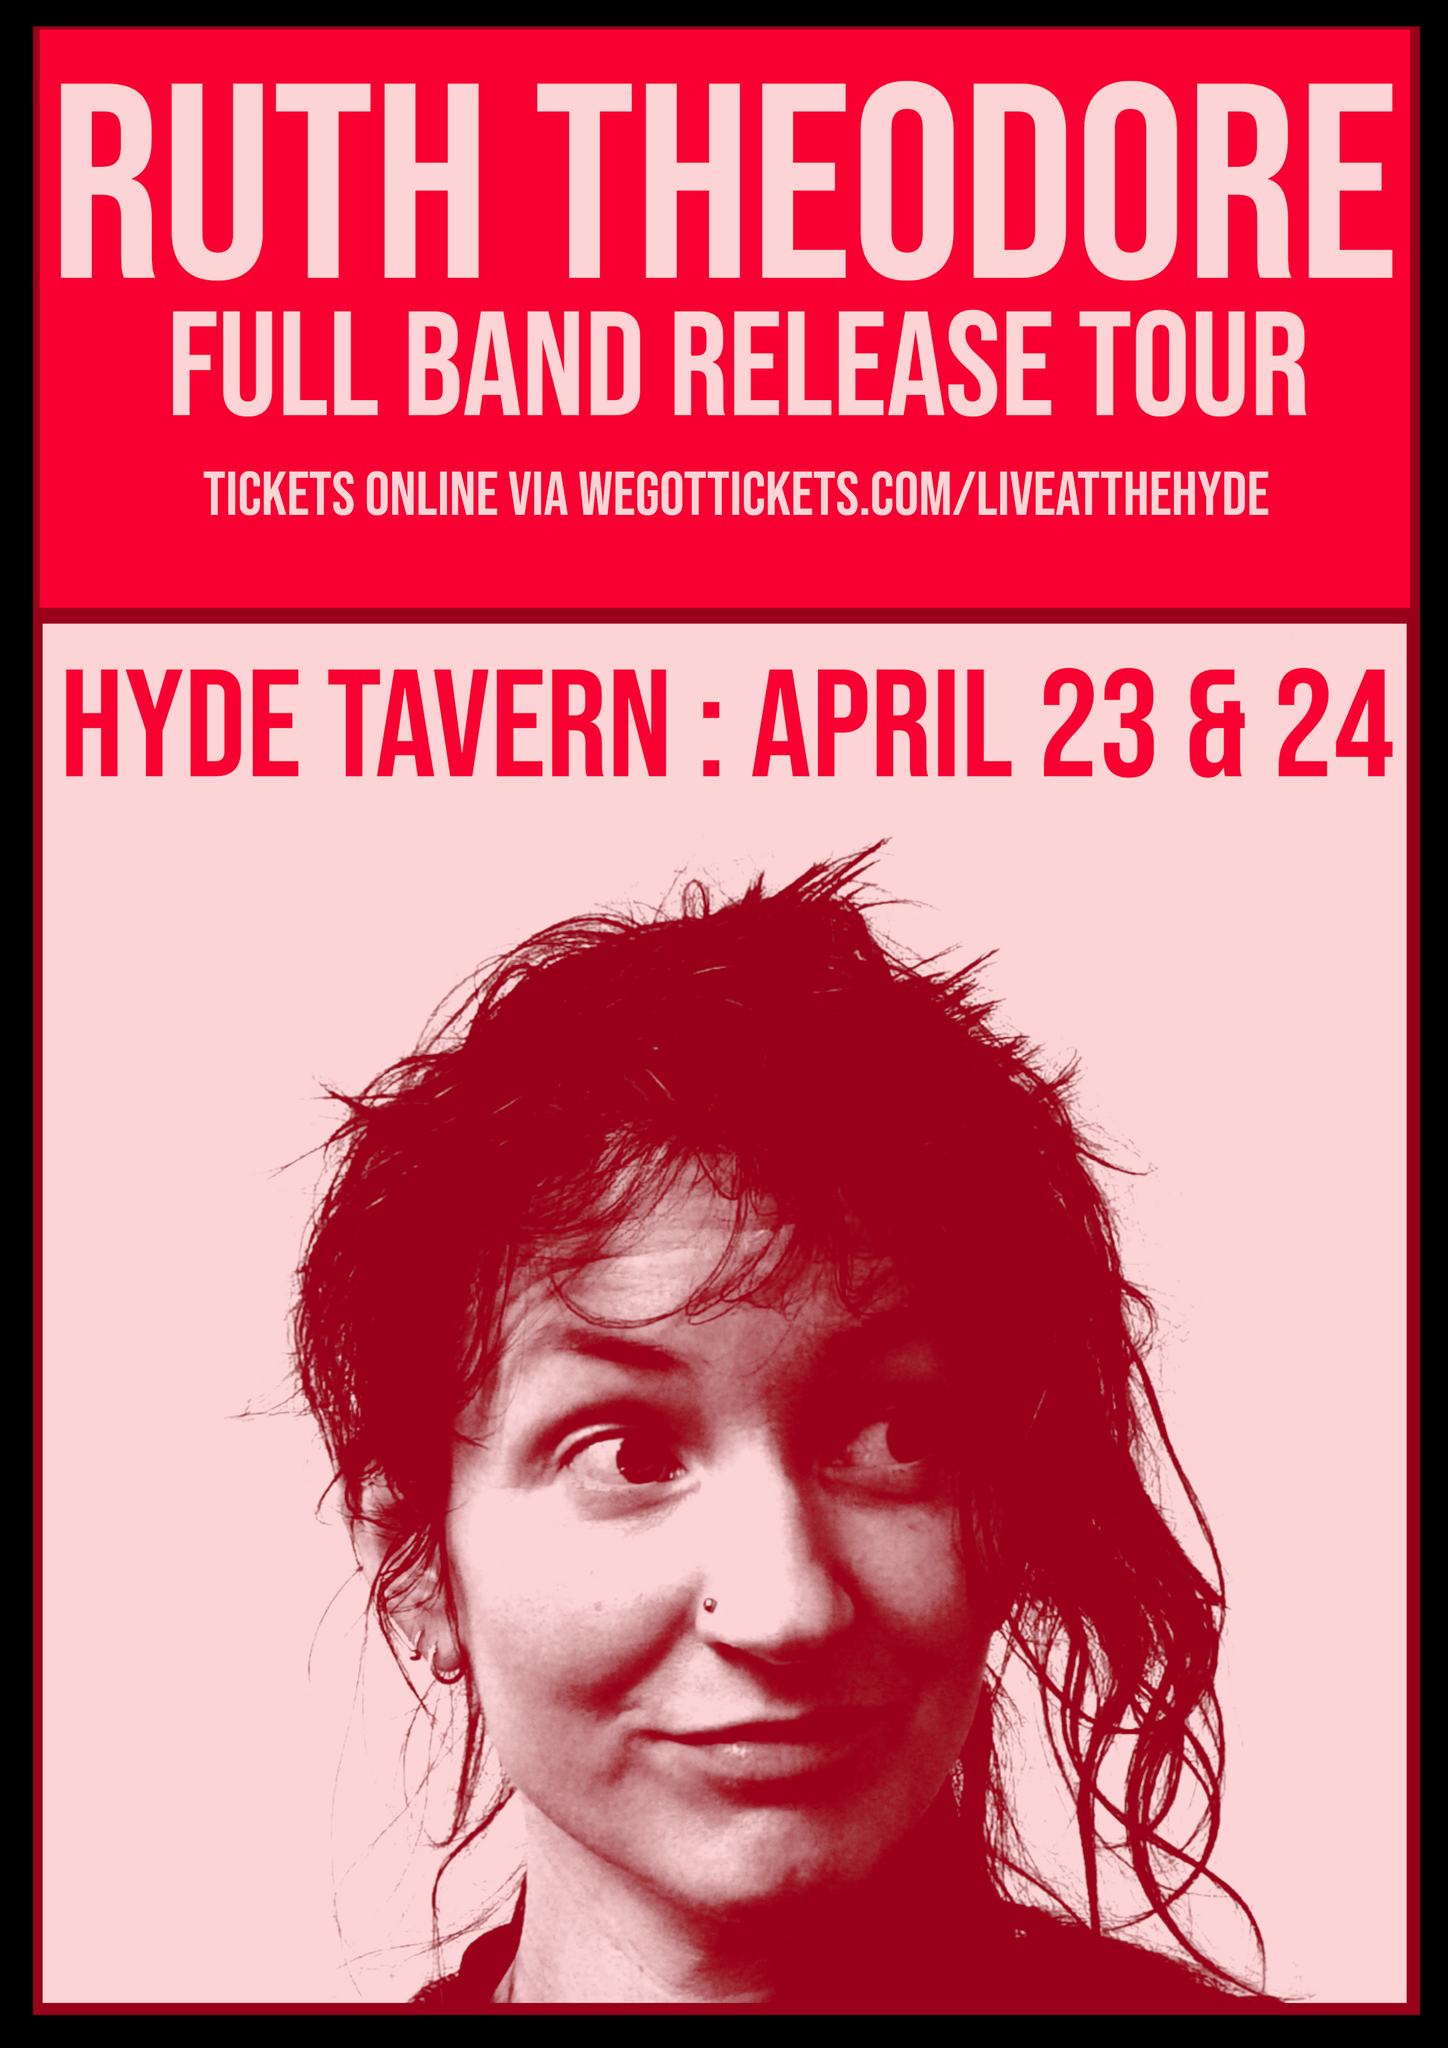 Ruth Theodore - Full band release tour!